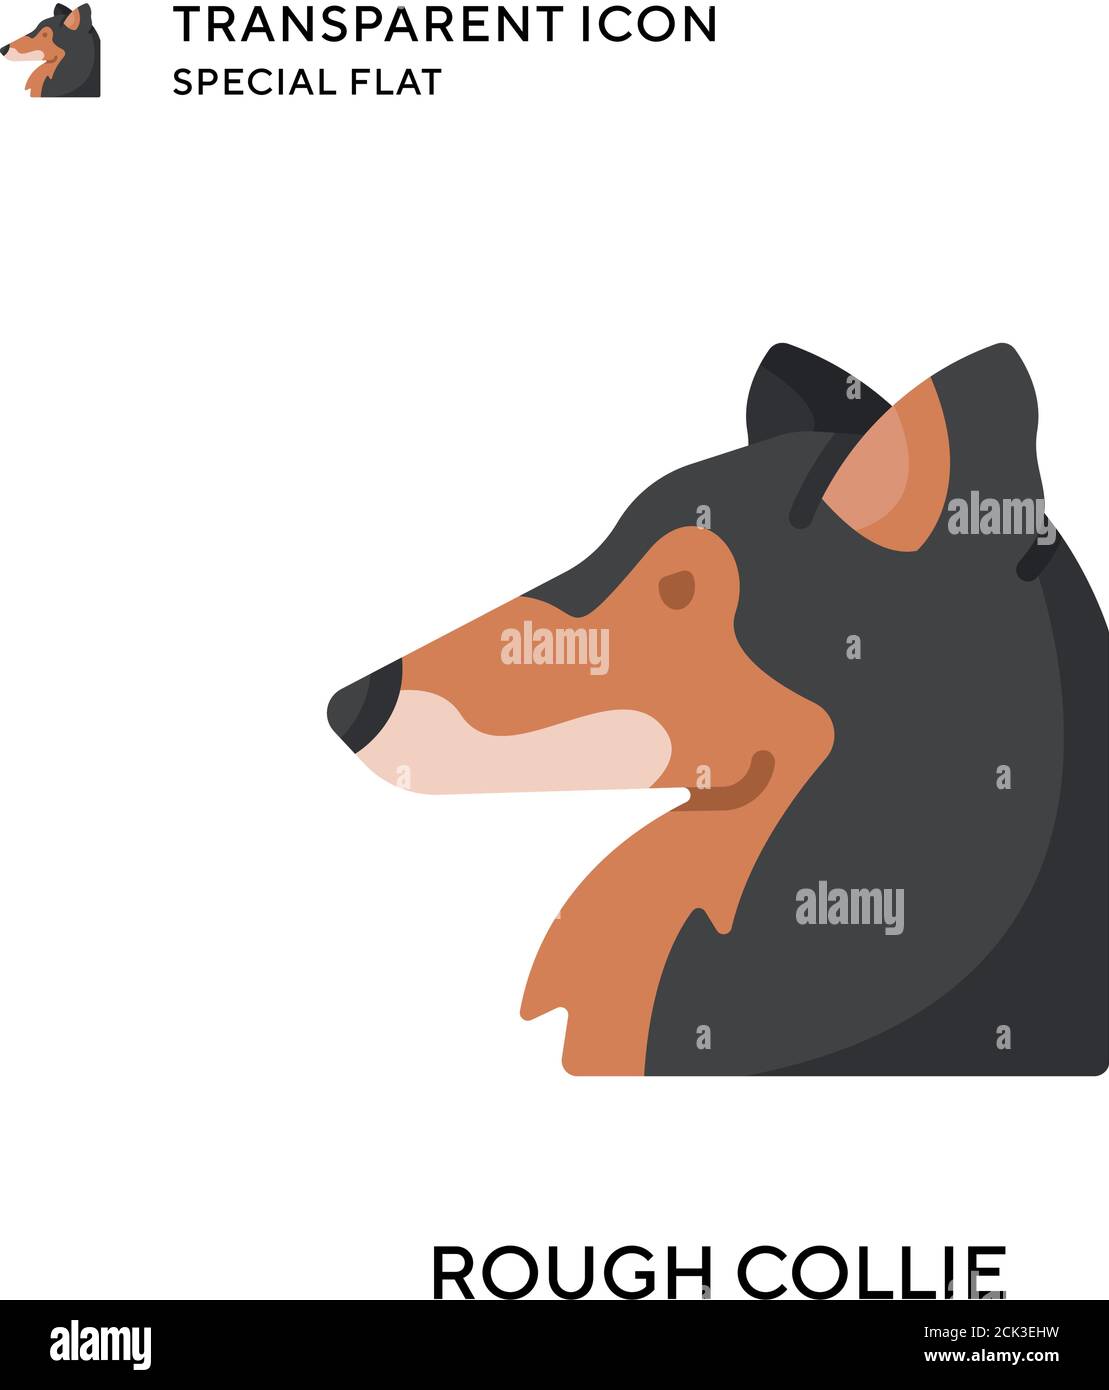 Rough collie vector icon. Flat style illustration. EPS 10 vector. Stock Vector